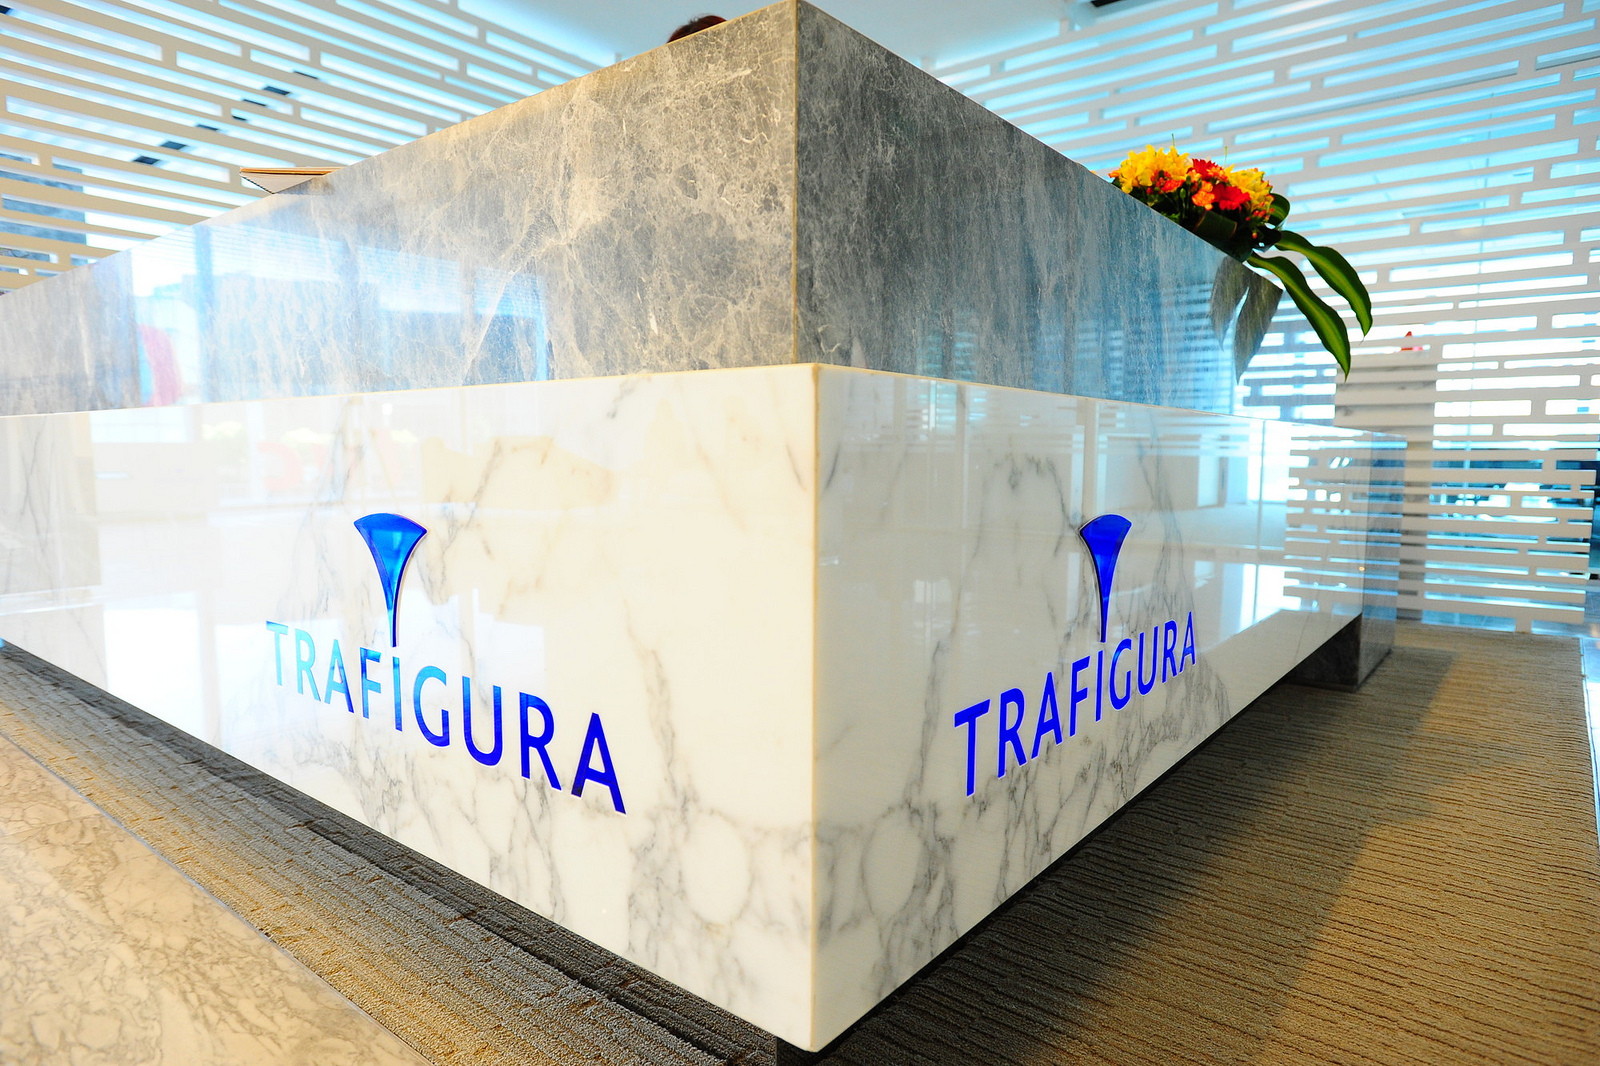 Trafigura profit leaps as oil and gas trading offsets losses at associates